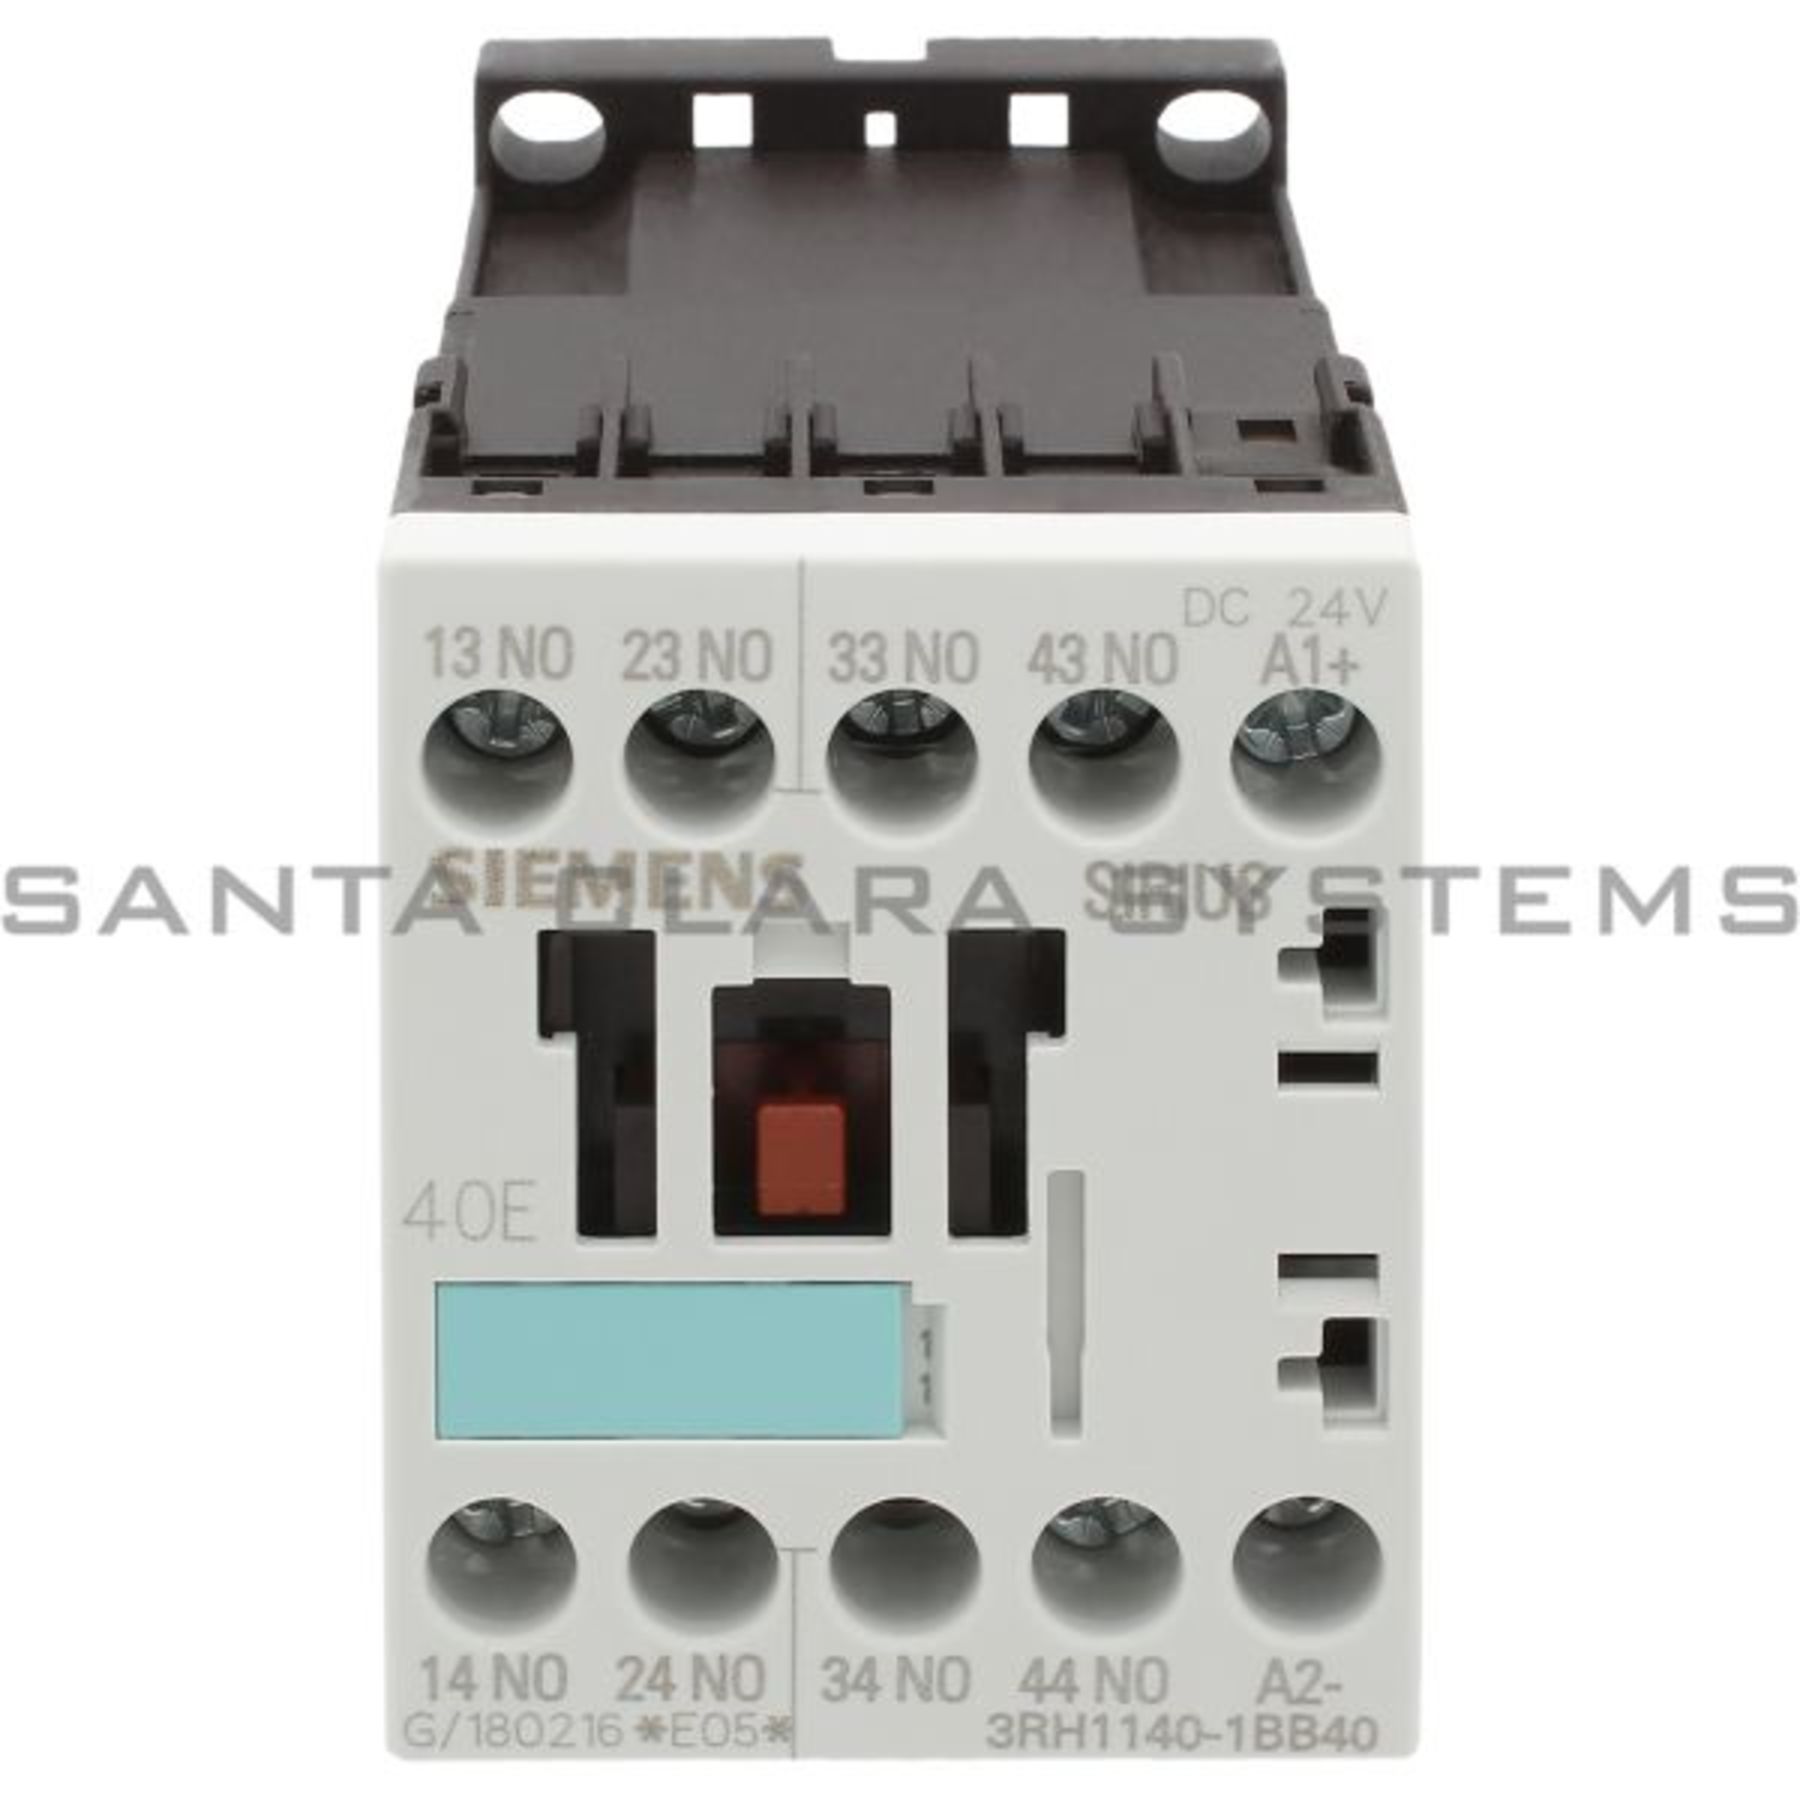 SIRUS AUXILIARY CONTACTOR RELAY NEW #243937 SIEMENS 3RH1140-1BB40